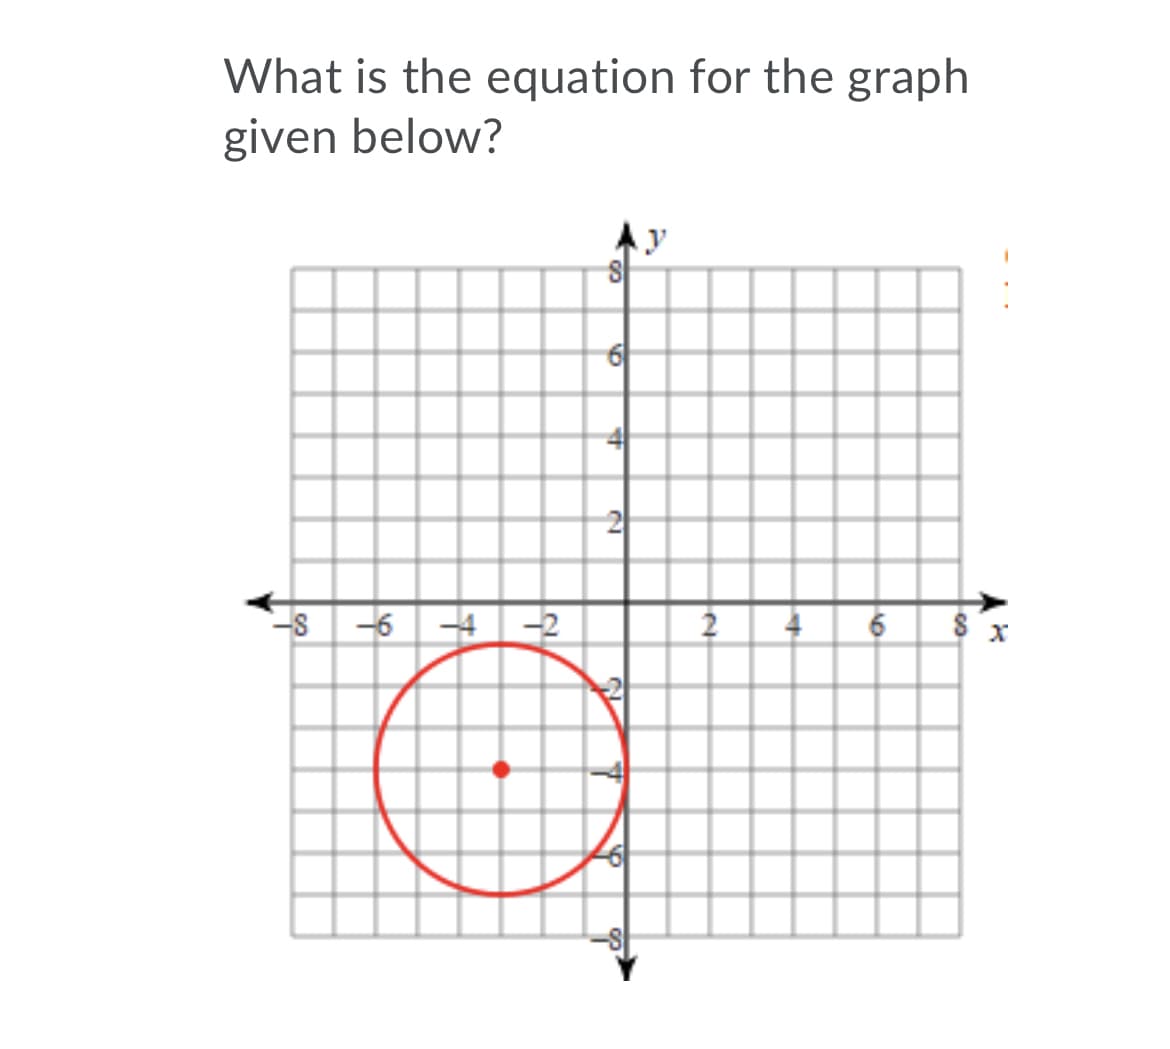 What is the equation for the graph
given below?
Ay
2
-8 -6 -4 -2
4 6 $ x
